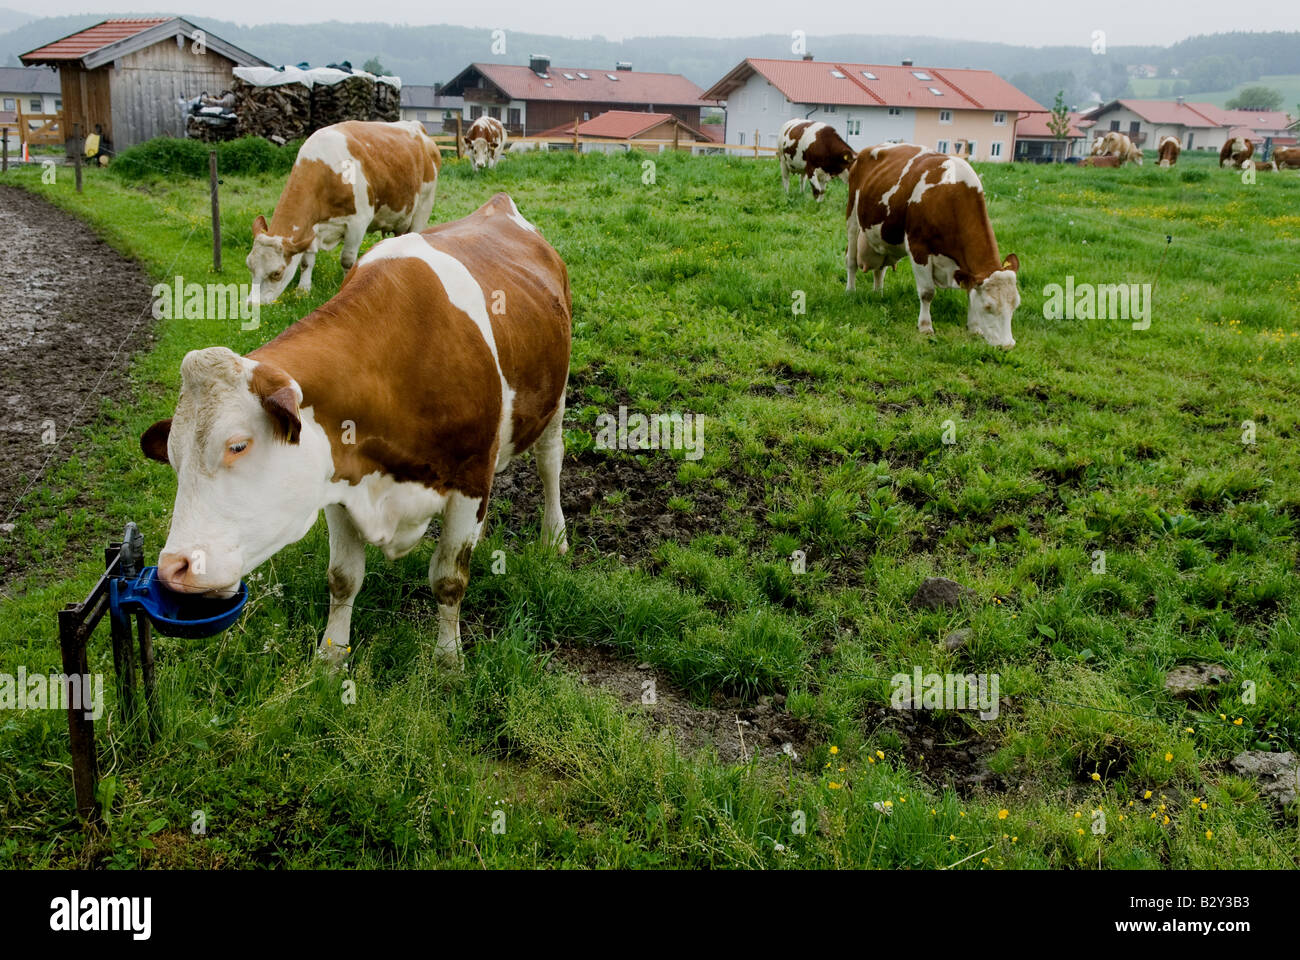 Dairy cattle, Waging, Bavaria, Germany. Stock Photo